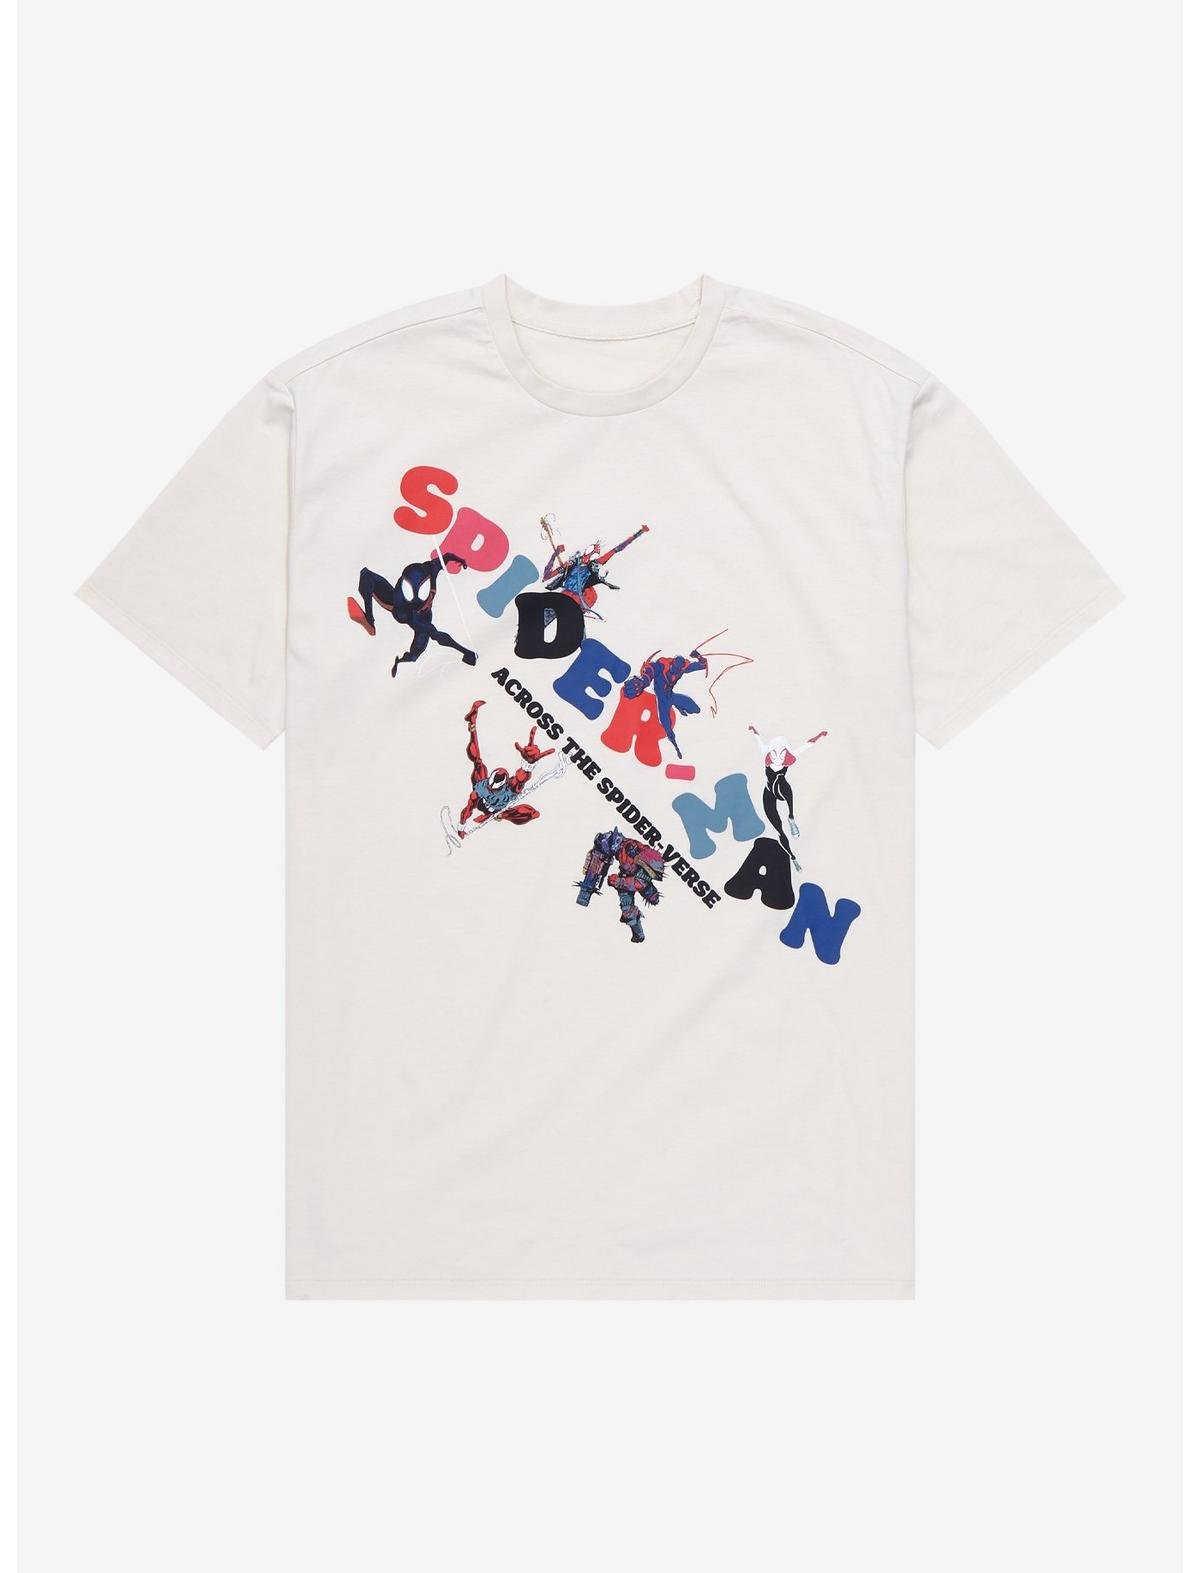 Spider-Man Across the Spider-Verse boxlunch artistic tee